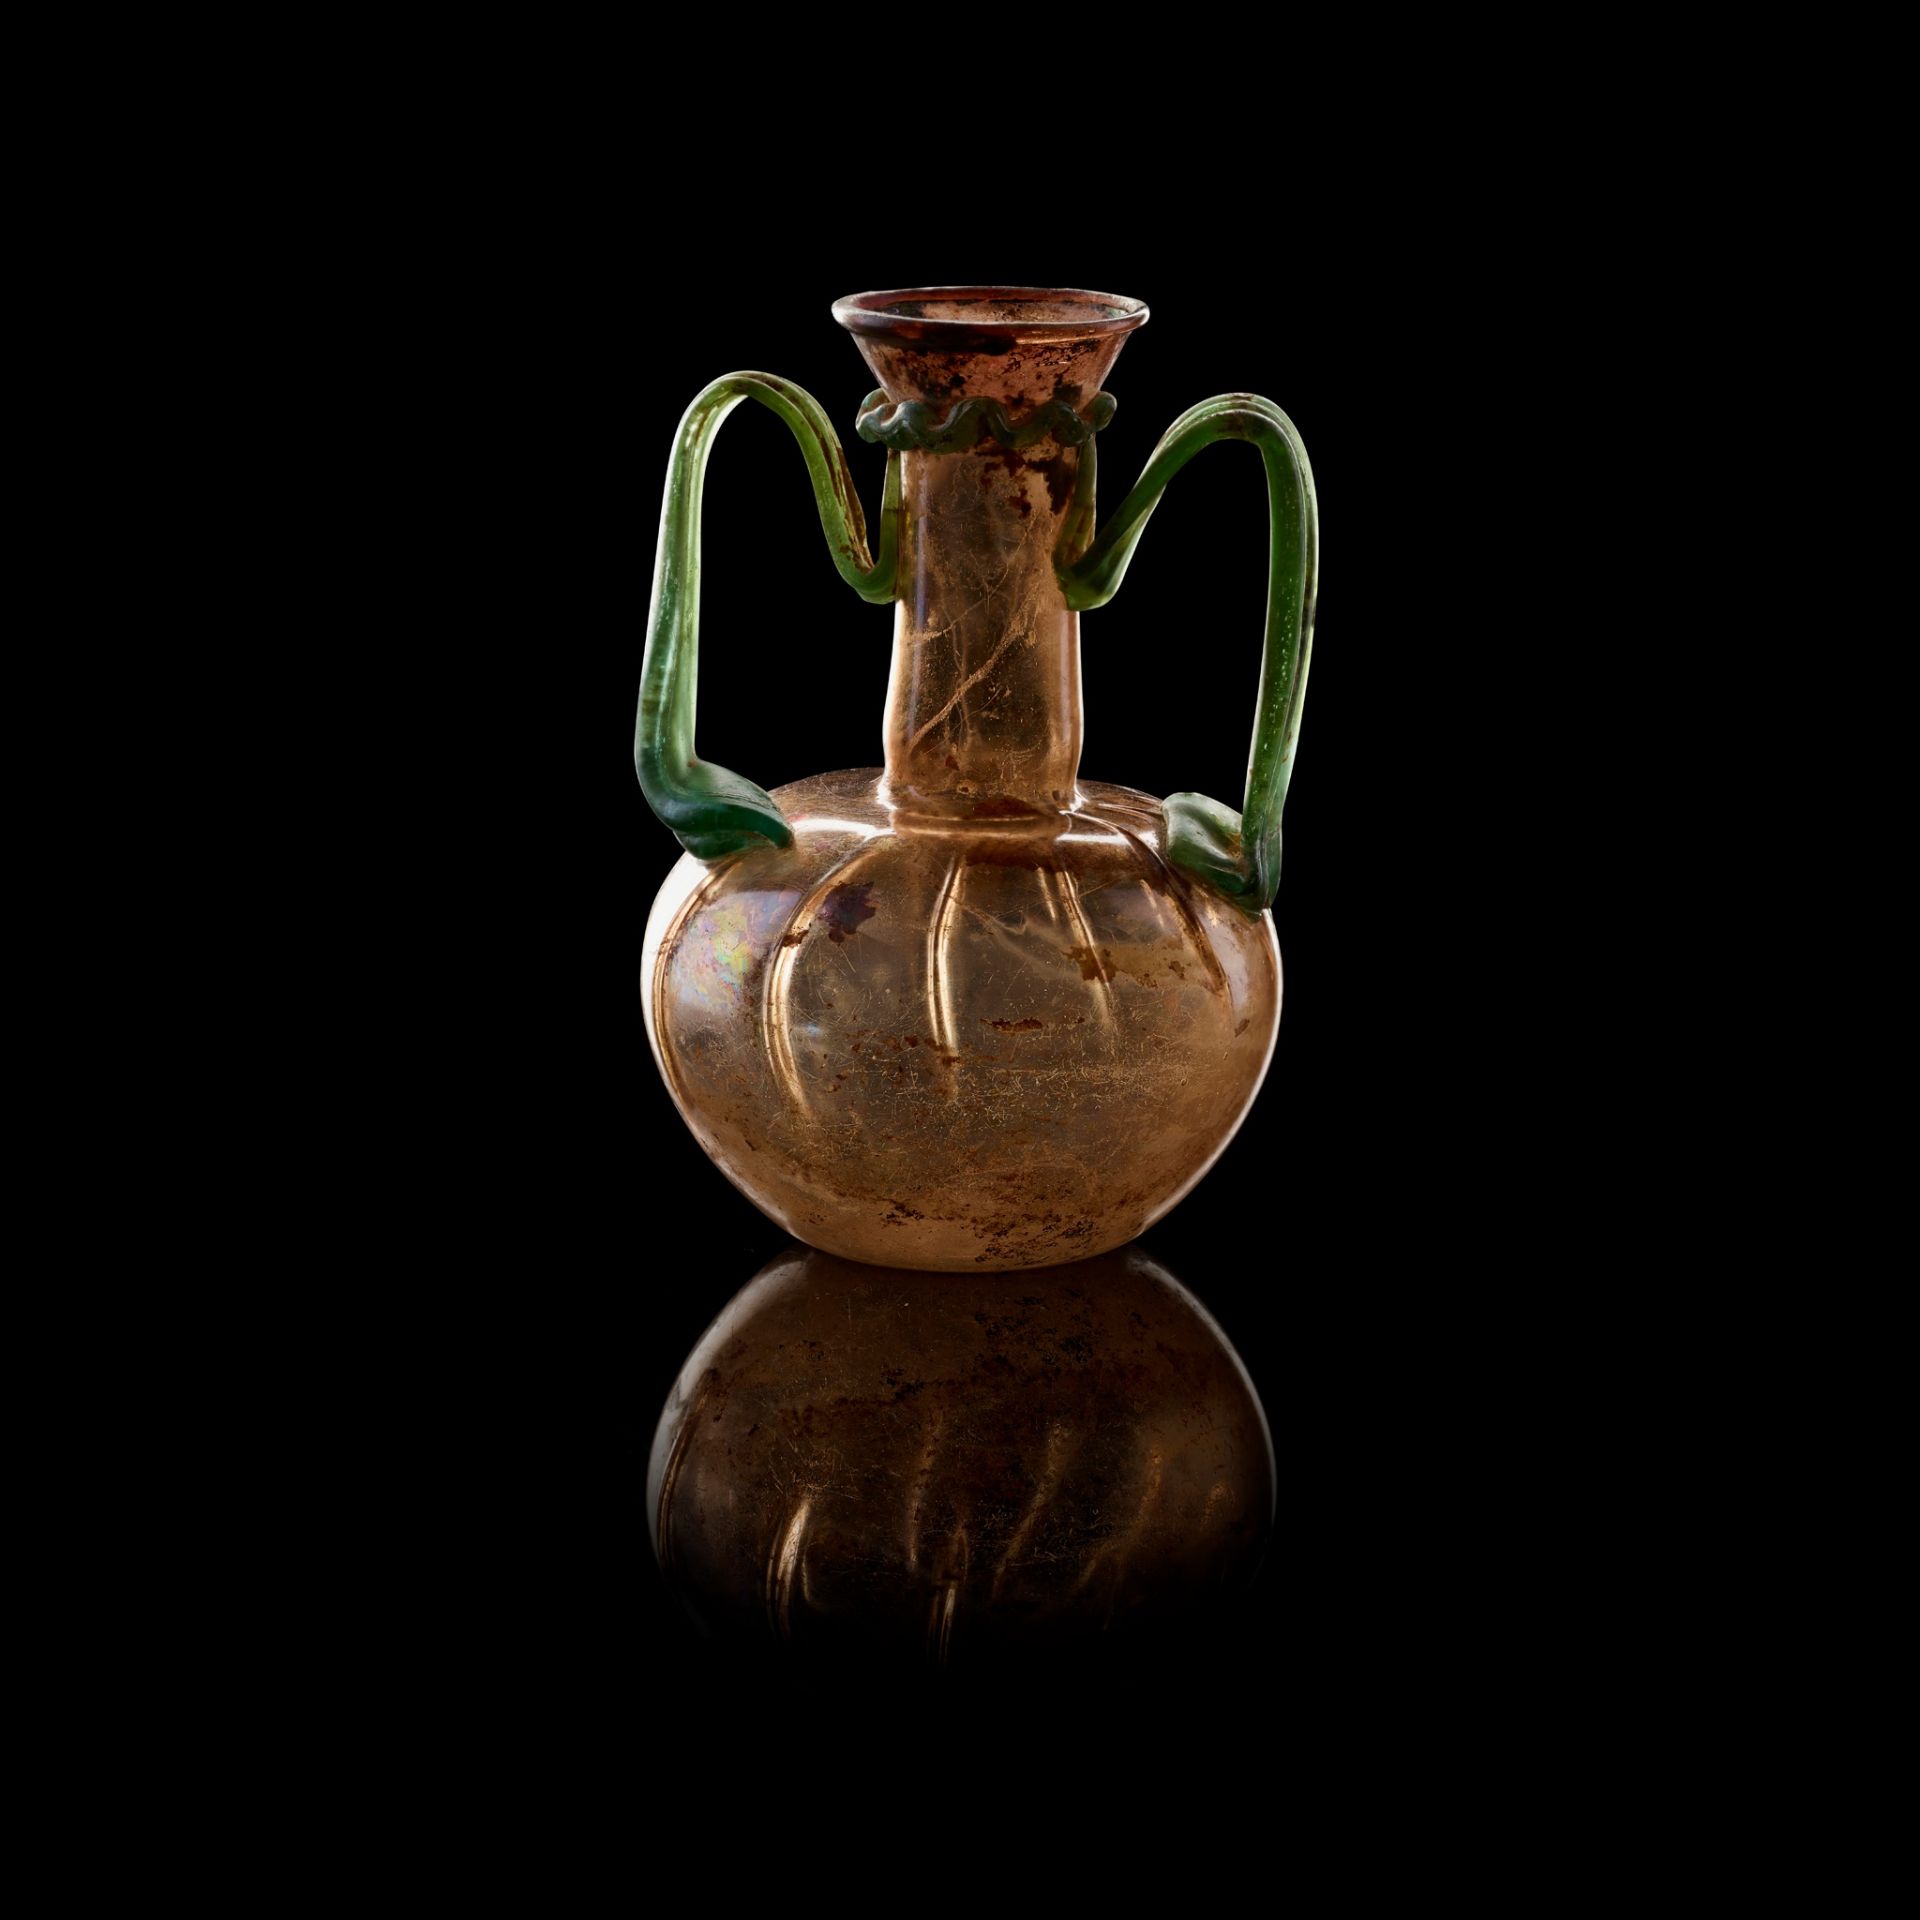 LARGE ROMAN GLASS TWIN HANDLED JAR EUROPE OR NEAR EAST, 3RD CENTURY A.D. - Image 2 of 3